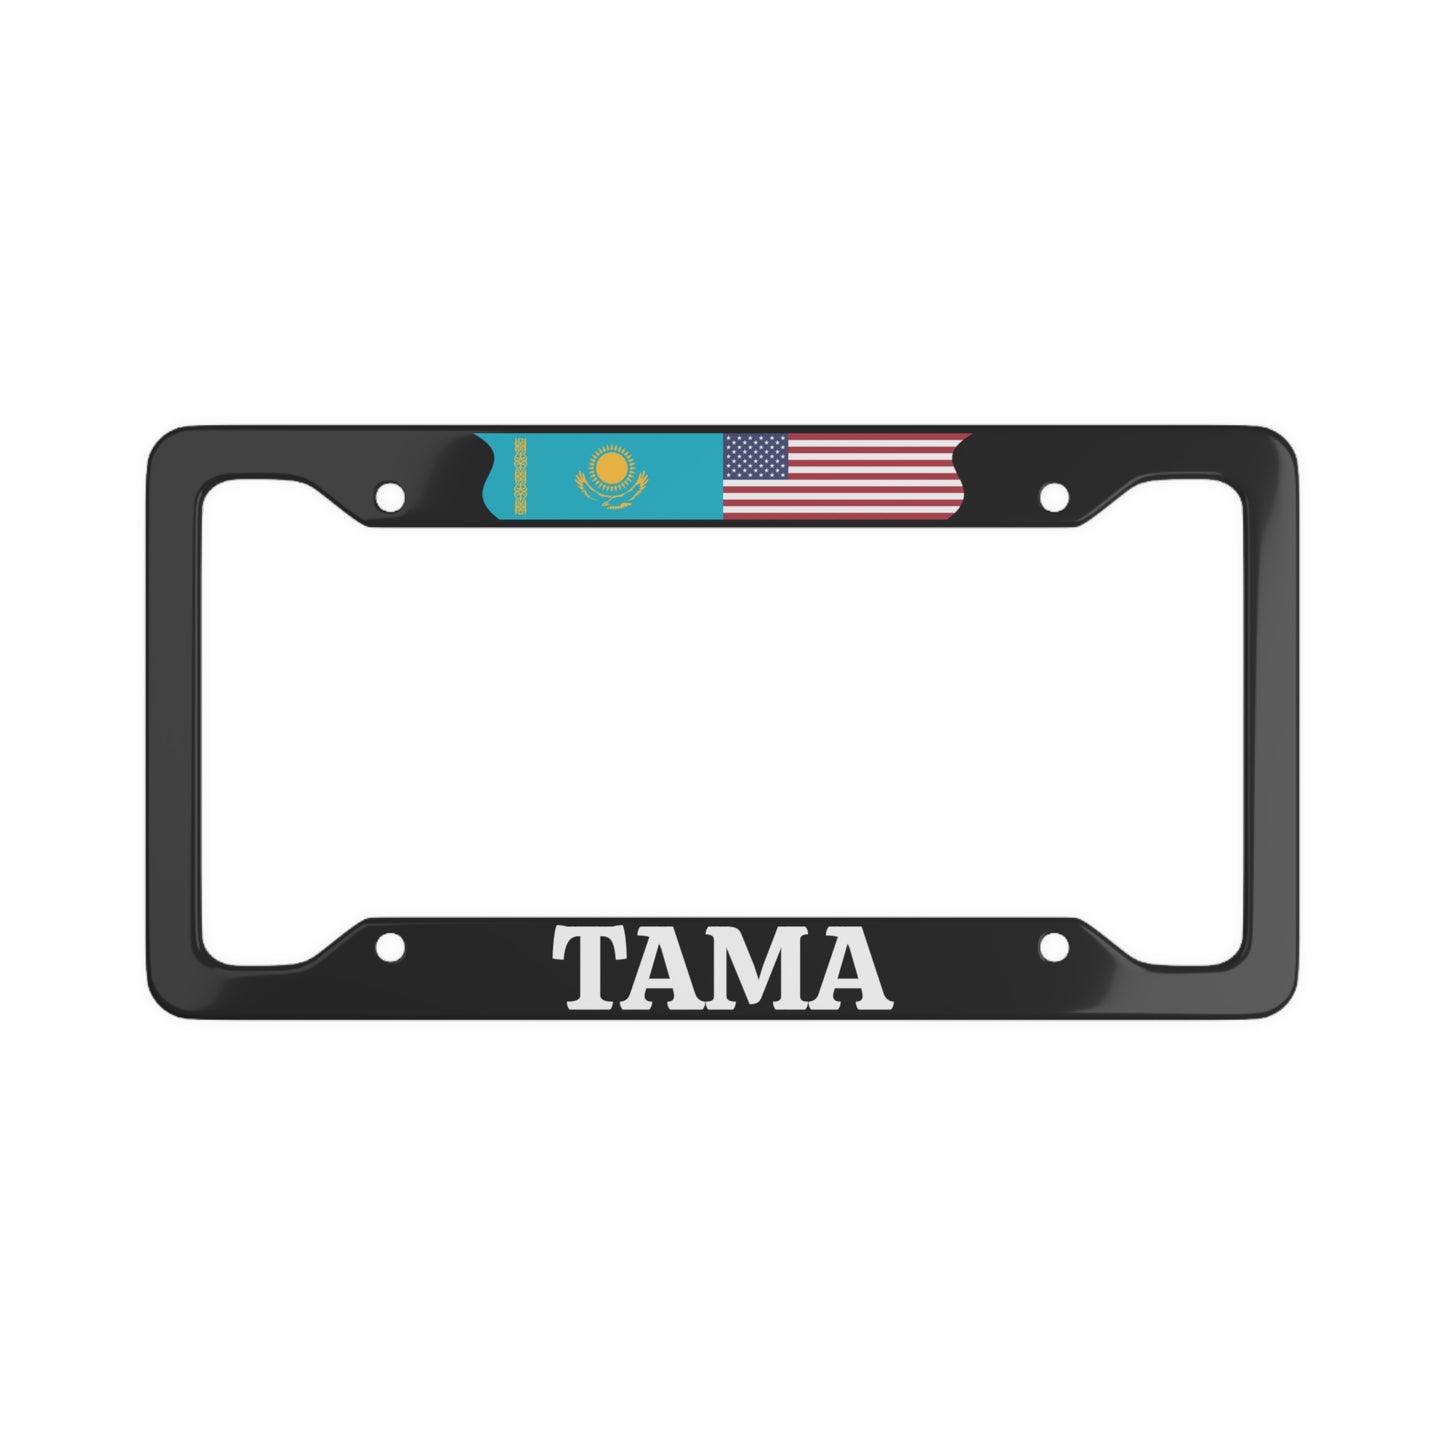 TAMA with flag License Plate Frame